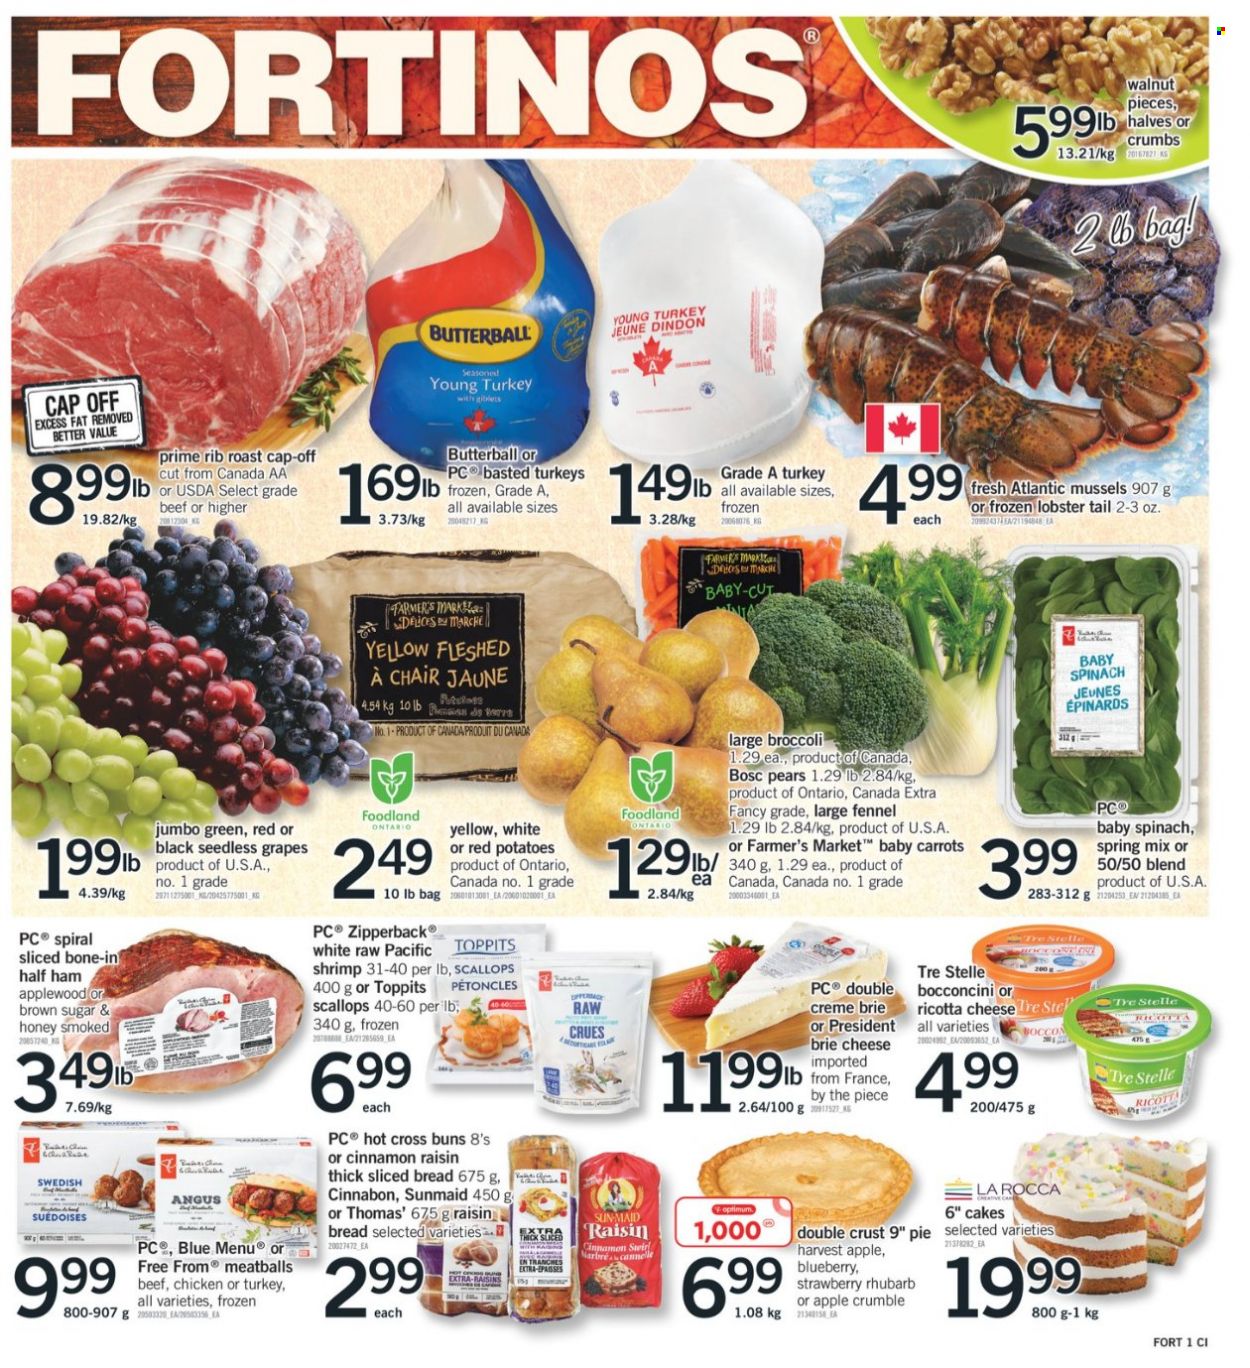 thumbnail - Fortinos Flyer - September 30, 2021 - October 06, 2021 - Sales products - bread, cake, pie, buns, broccoli, carrots, rhubarb, spinach, potatoes, red potatoes, grapes, seedless grapes, pears, lobster, mussels, scallops, lobster tail, shrimps, meatballs, Butterball, half ham, ham, bocconcini, cheese, brie, Président, fennel, honey, walnuts, chair, cap, ricotta. Page 1.